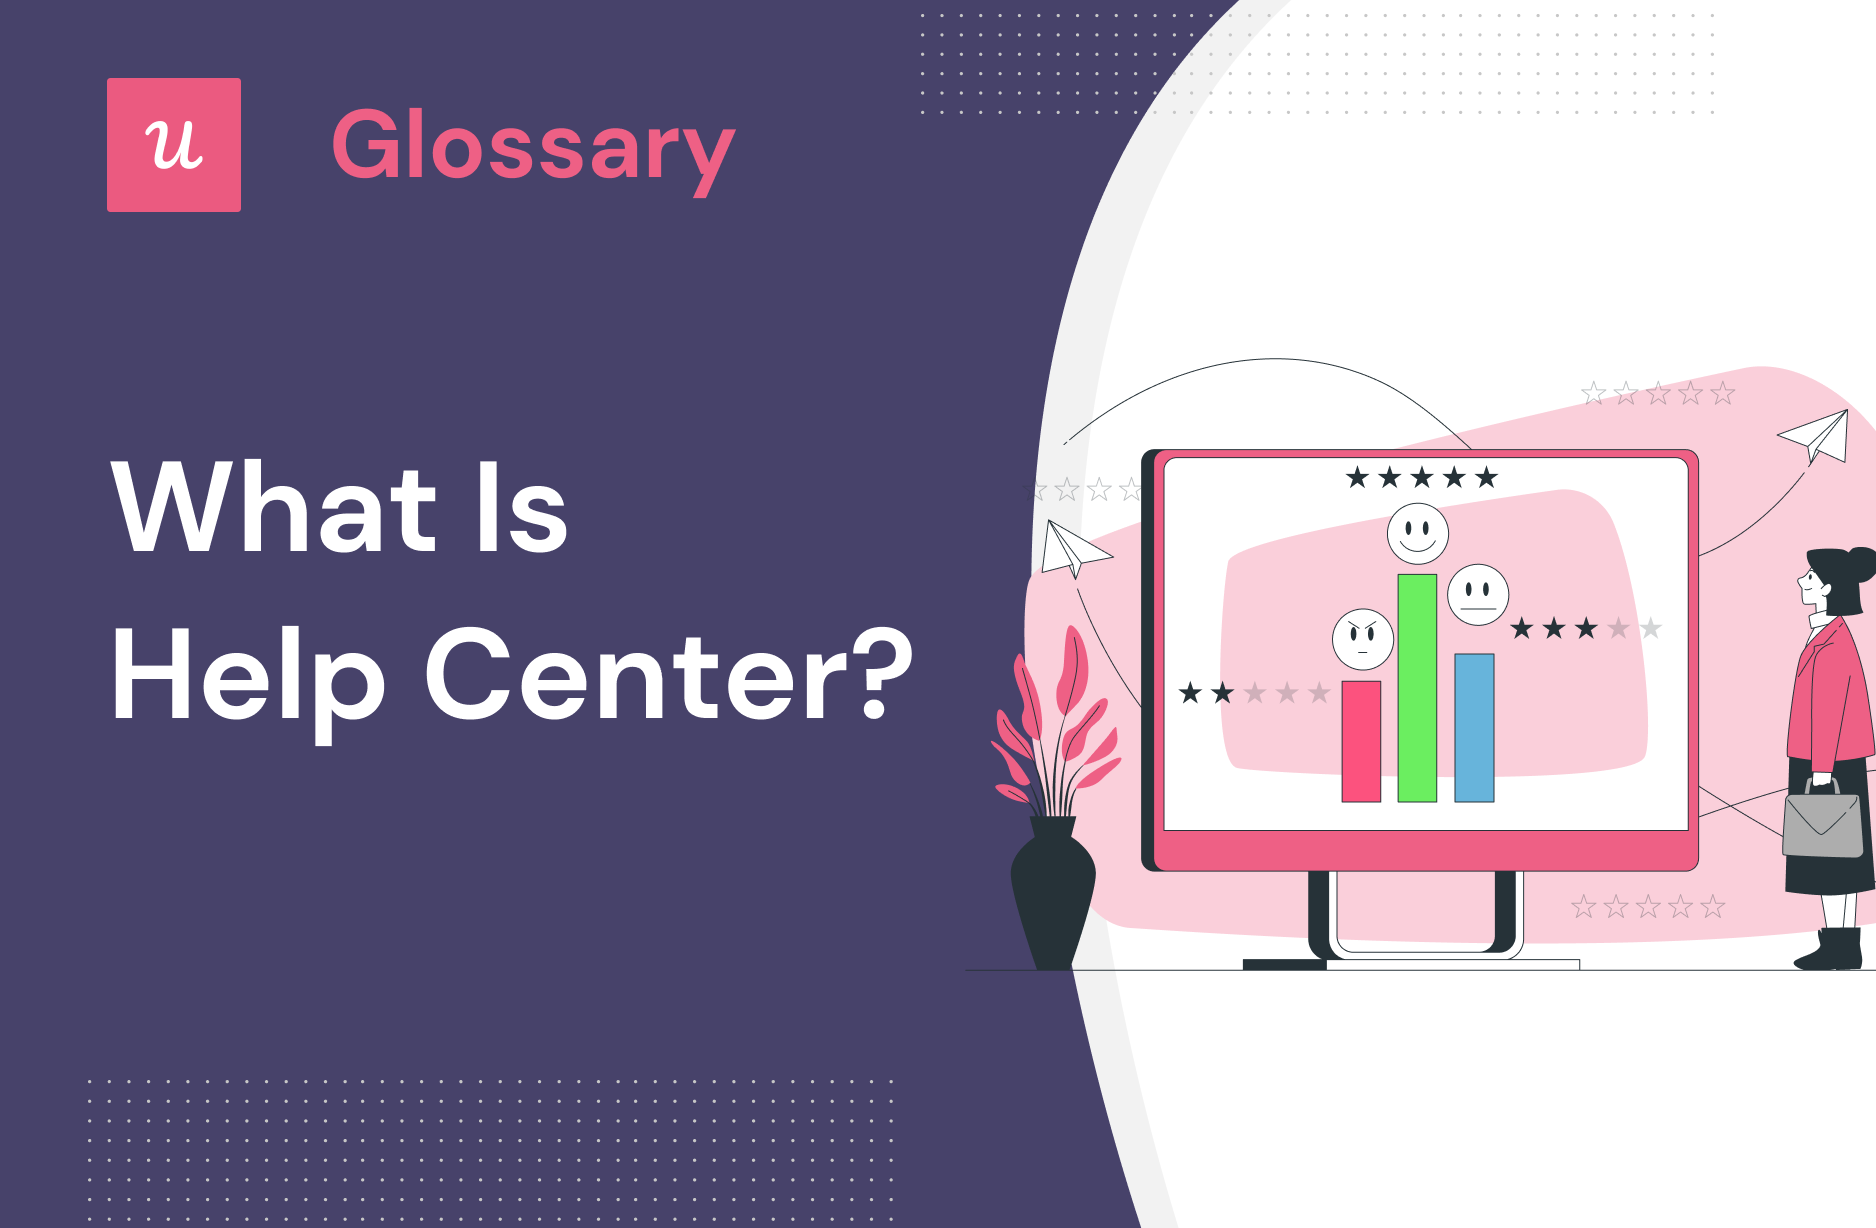 What is Help Center?